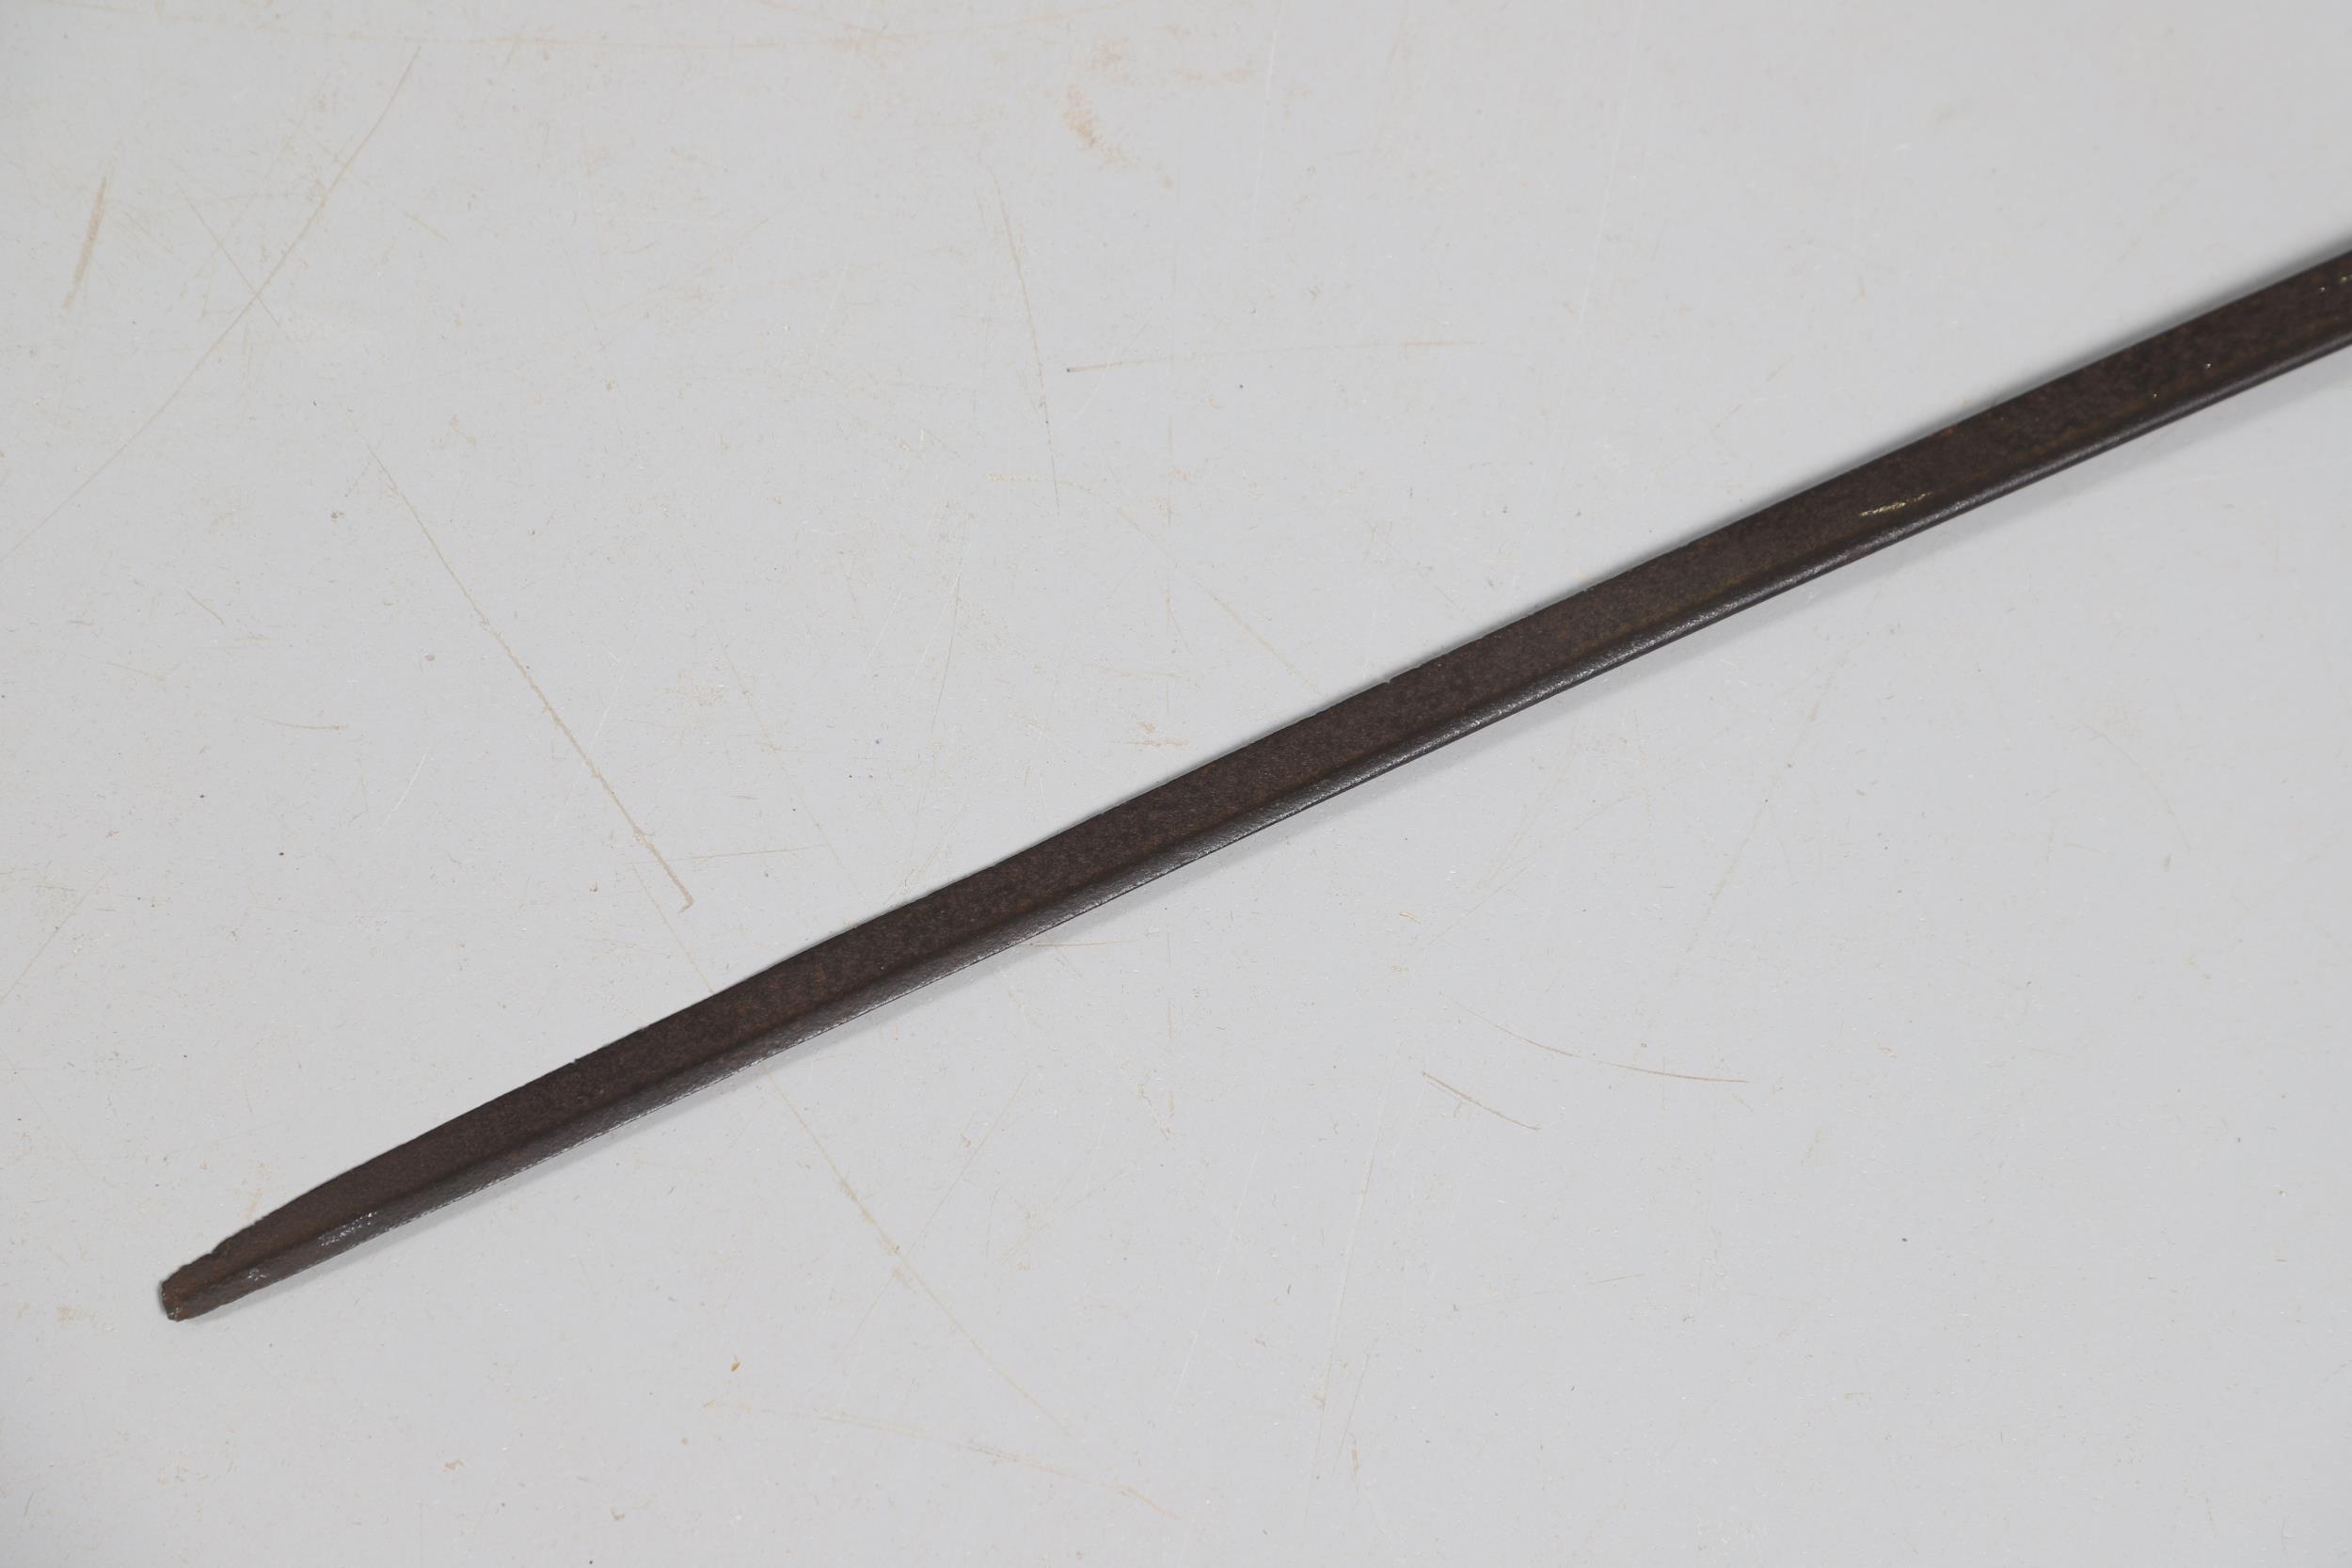 AN EAST INDIA COMPANY OFFICER'S 1822 PATTERN SWORD. - Image 6 of 10